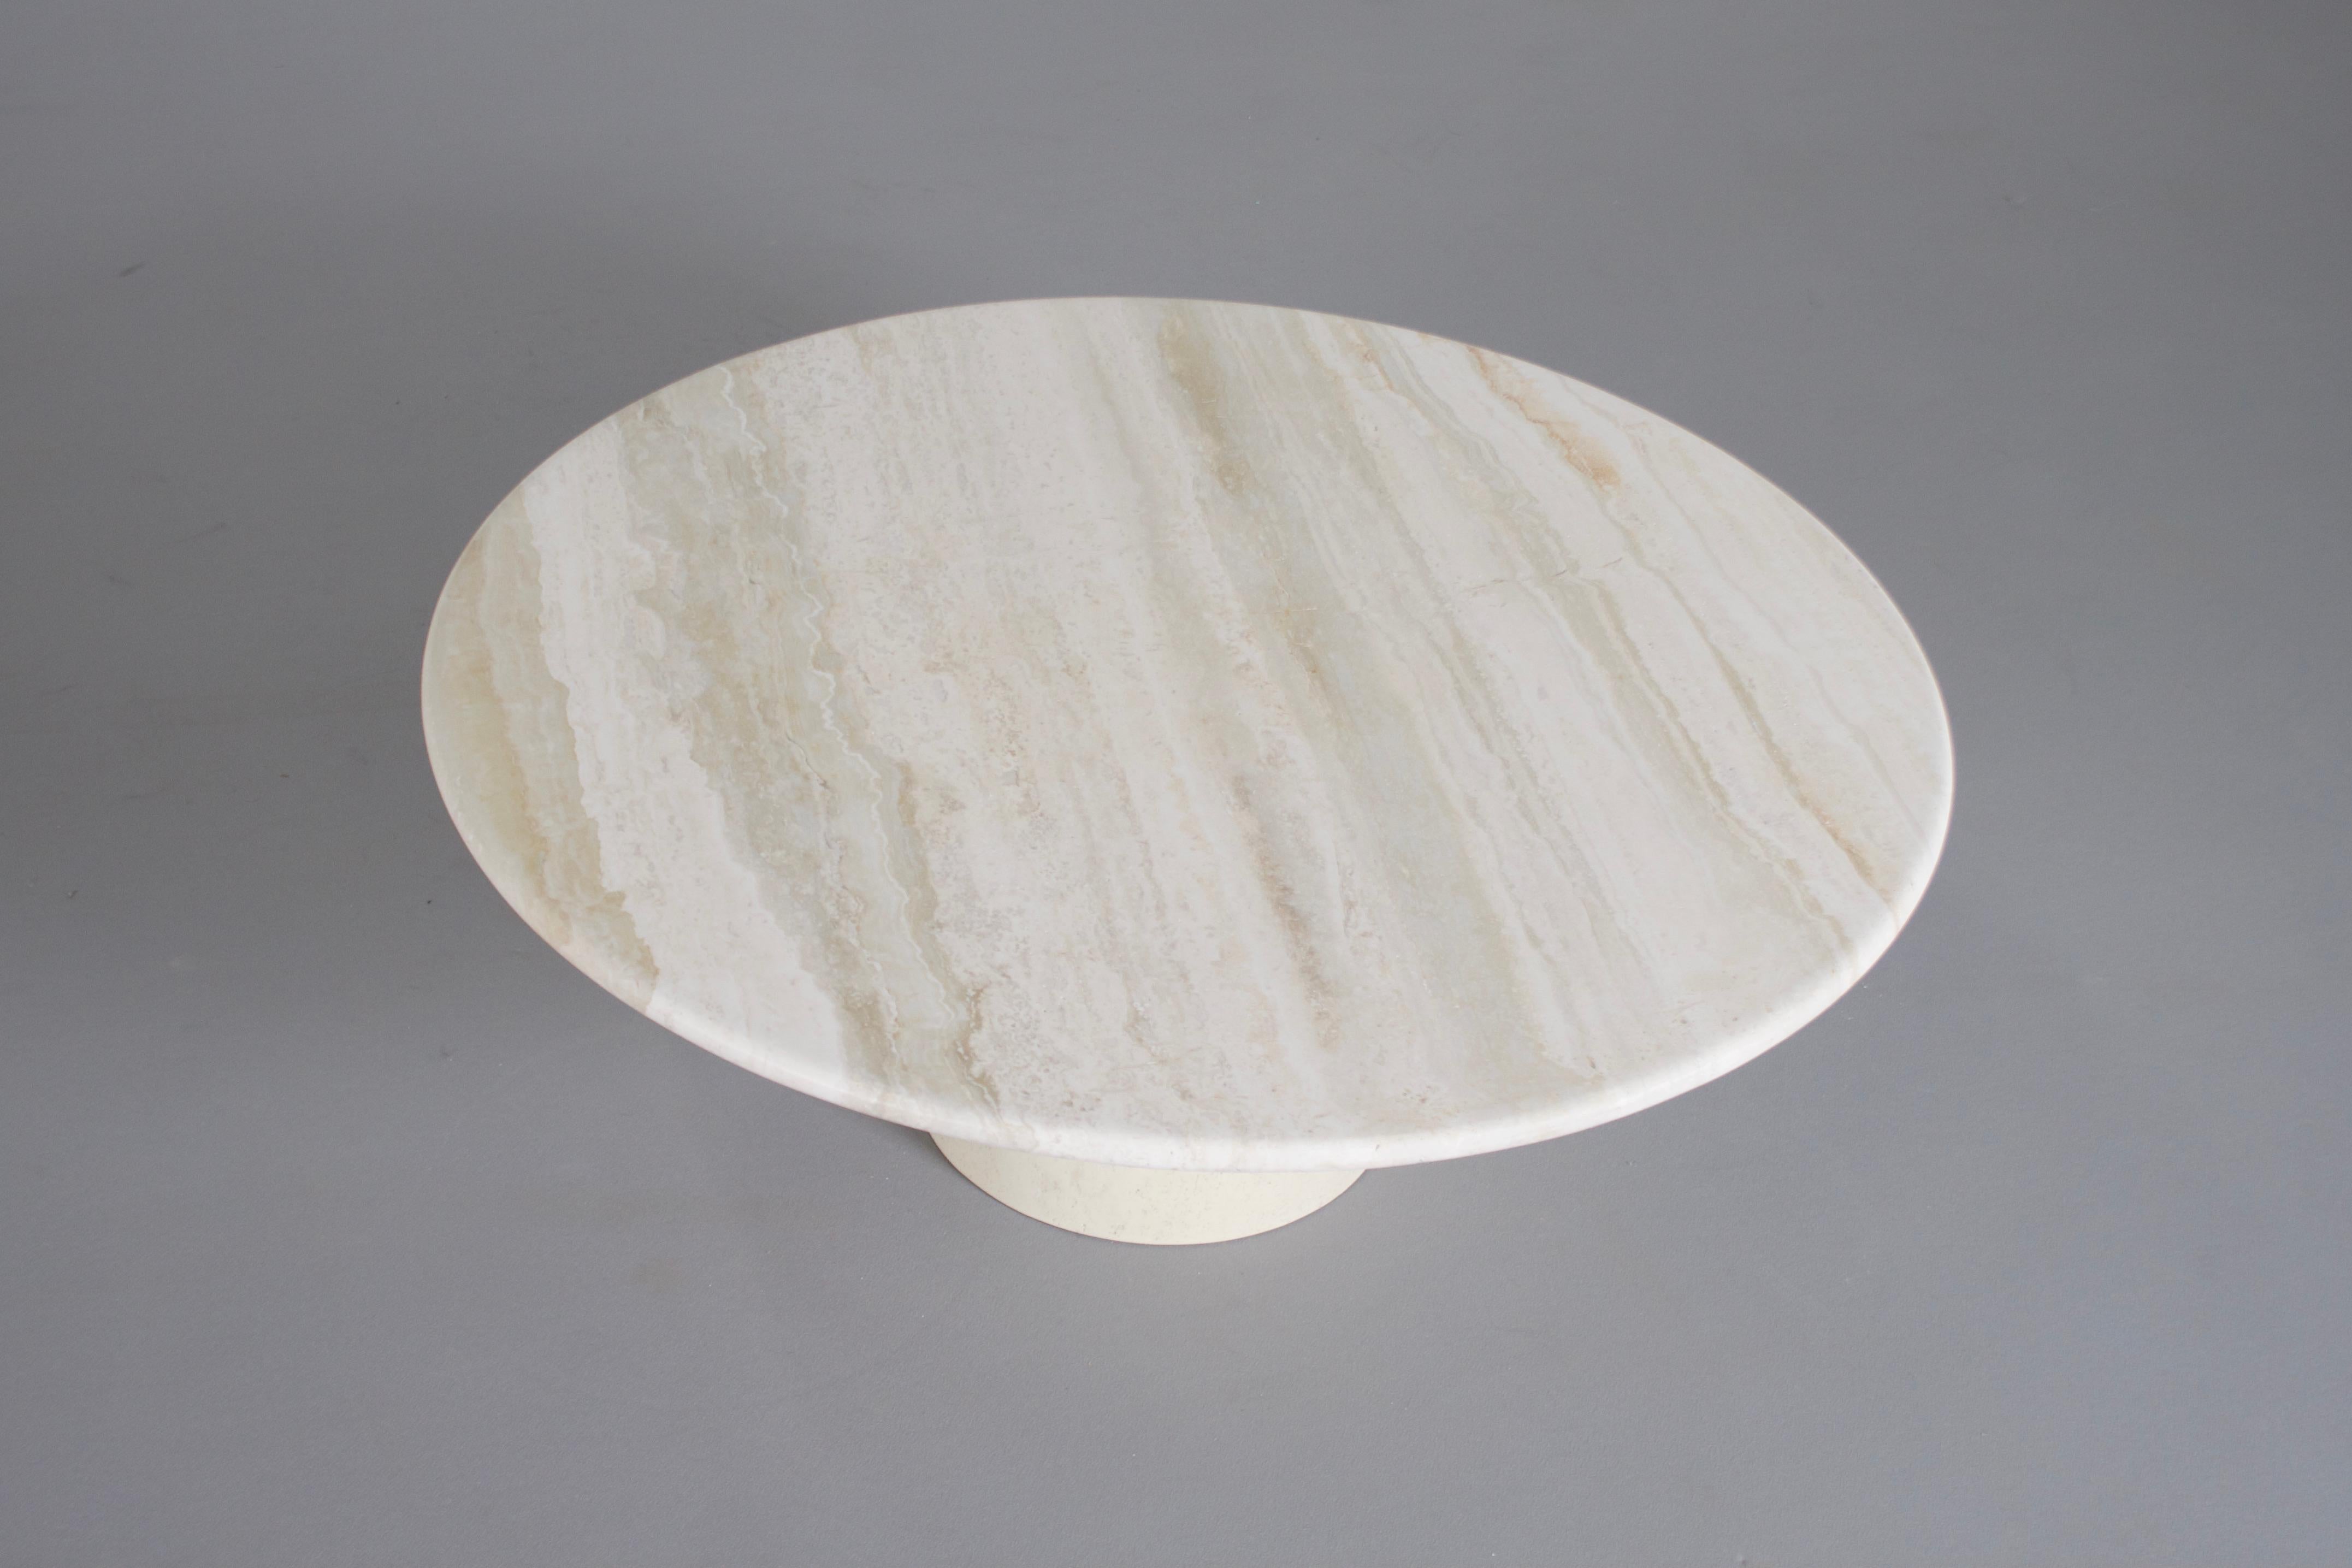 Round travertine coffee table in very good condition. 

Manufactured by Up&Up Italy in the 1970s 

The table has a round travertine top. 

The base of the table is round and also made of solid travertine.

The travertine surface is absolutely